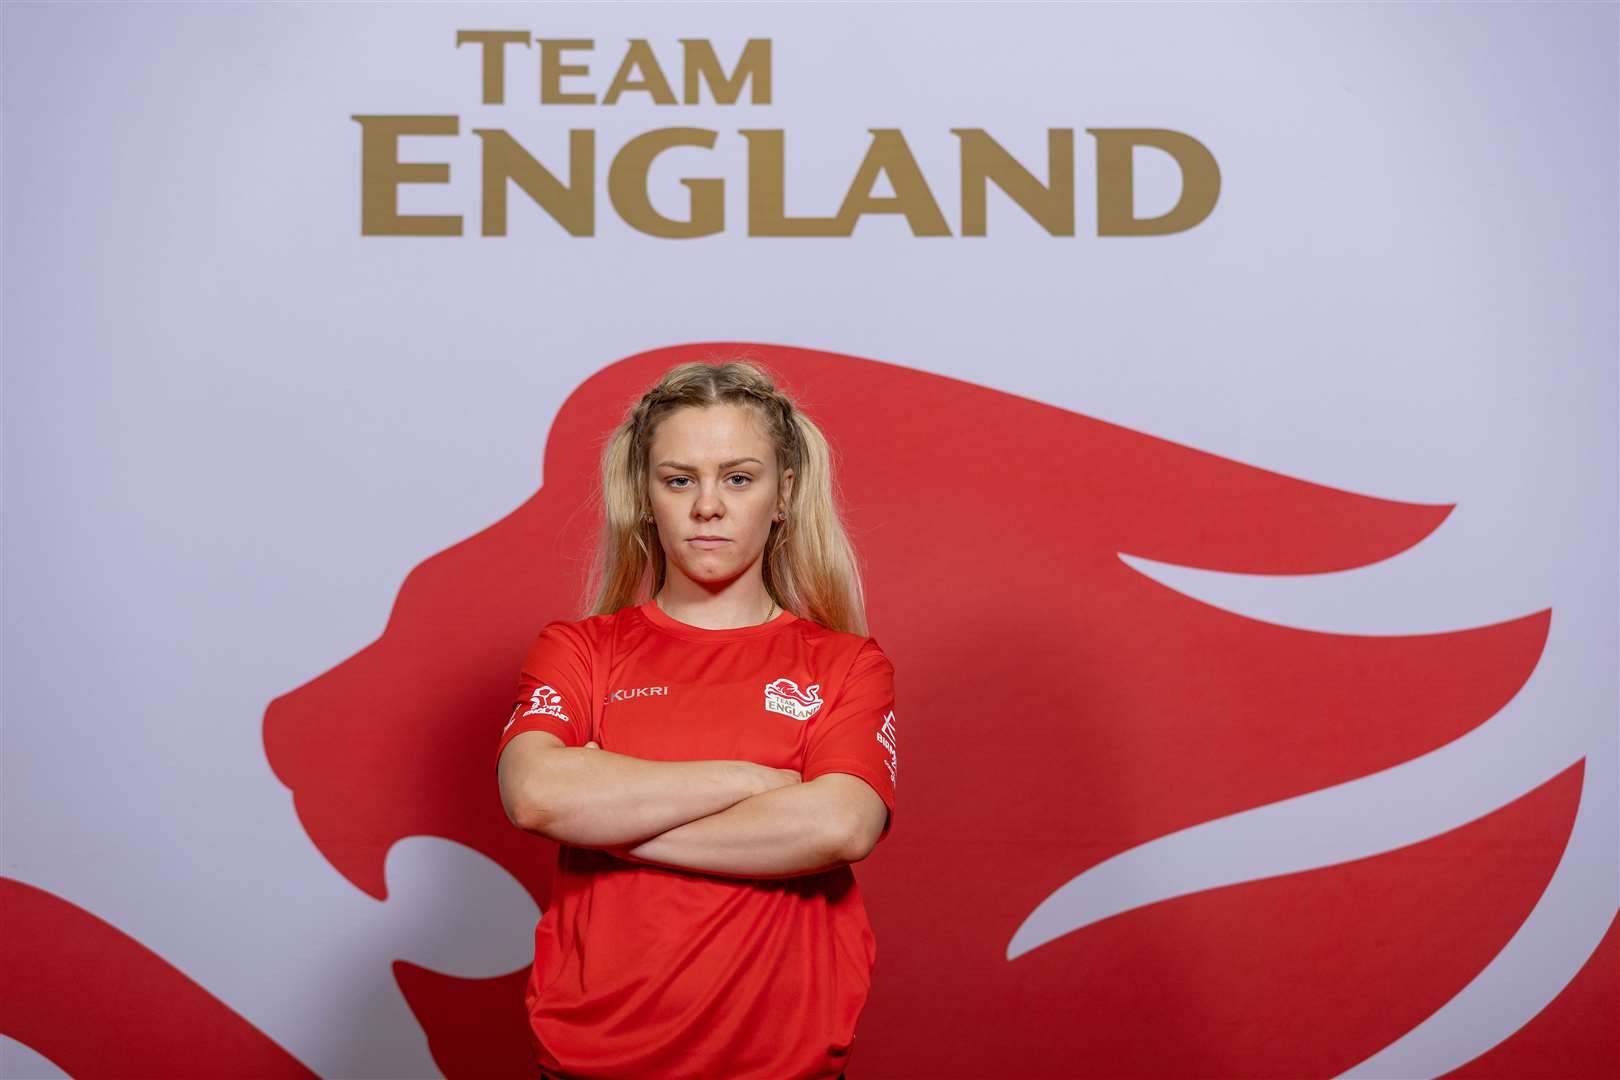 Demie-Jade Resztan, 48kg, selected to represent Team England at Boxing in the 2022 Commonwealth Games in Birmingham. Photo Credit: Sam Mellish / Team England.